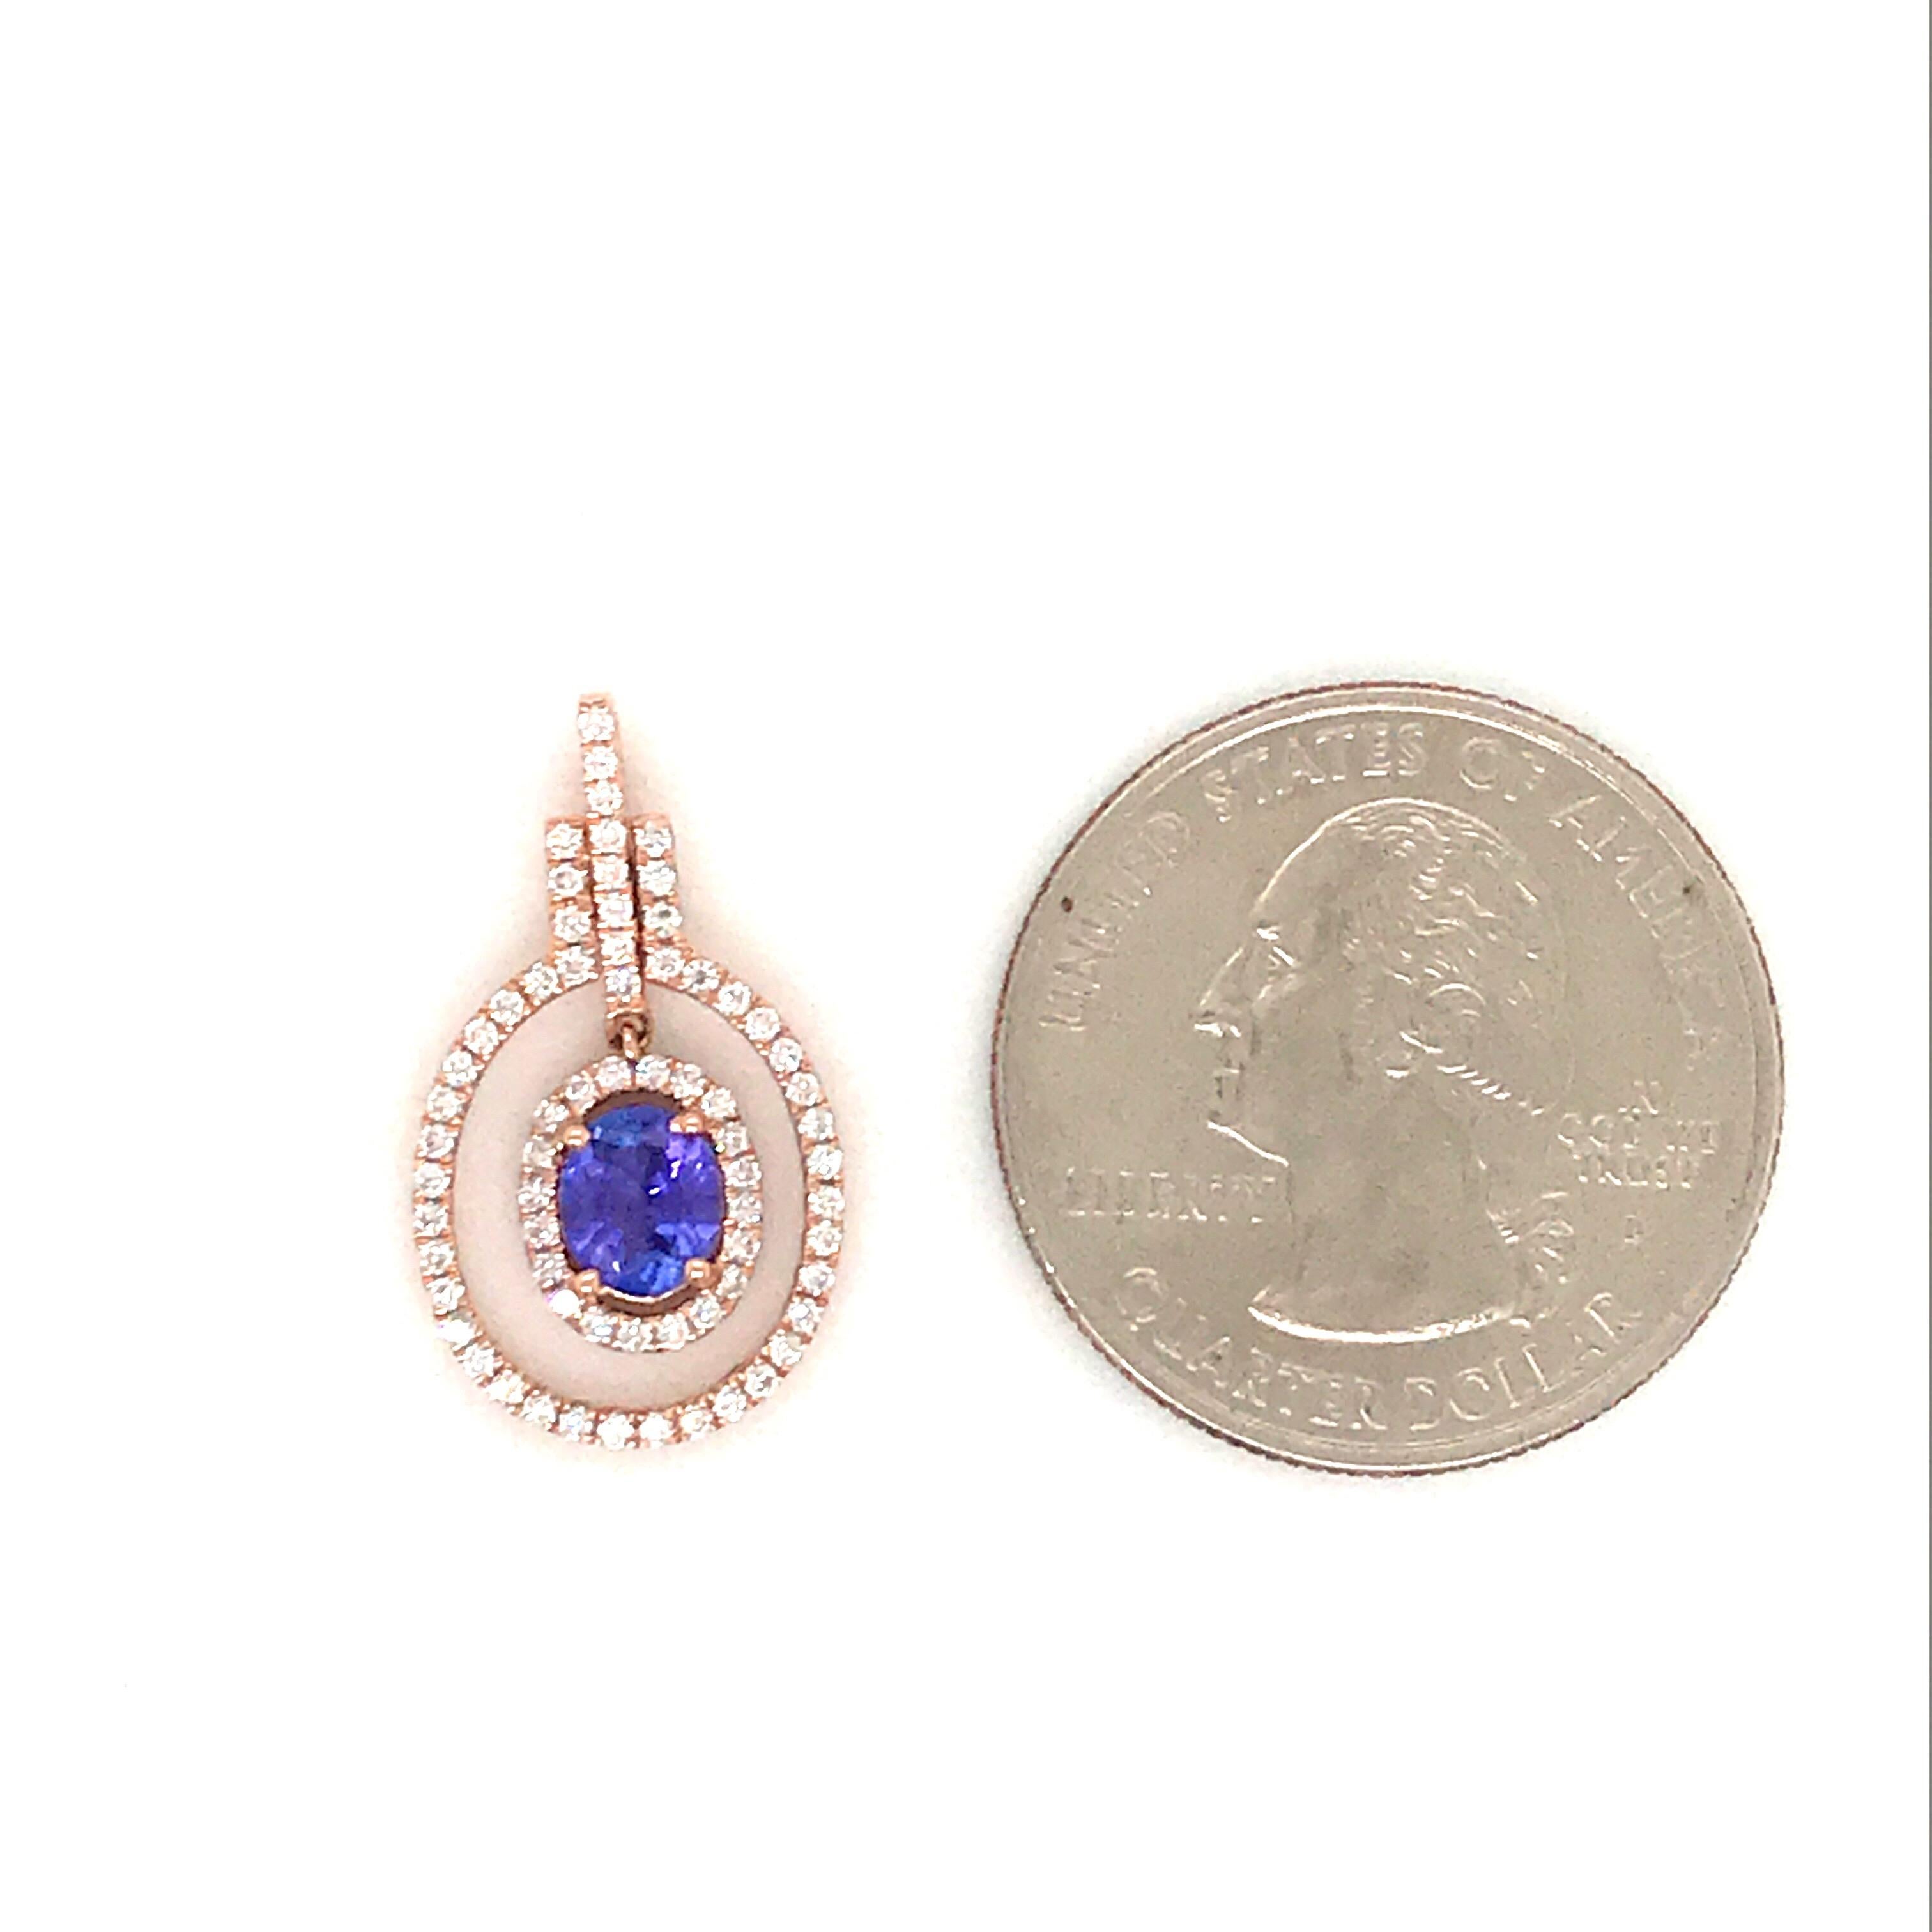 14K Rose gold pendant featuring one oval cut tanzanite, 0.62 carats, flanked with round brilliance weighing 0.28 carats. Comes with a 14k rose gold chain.
Color G
Clarity SI